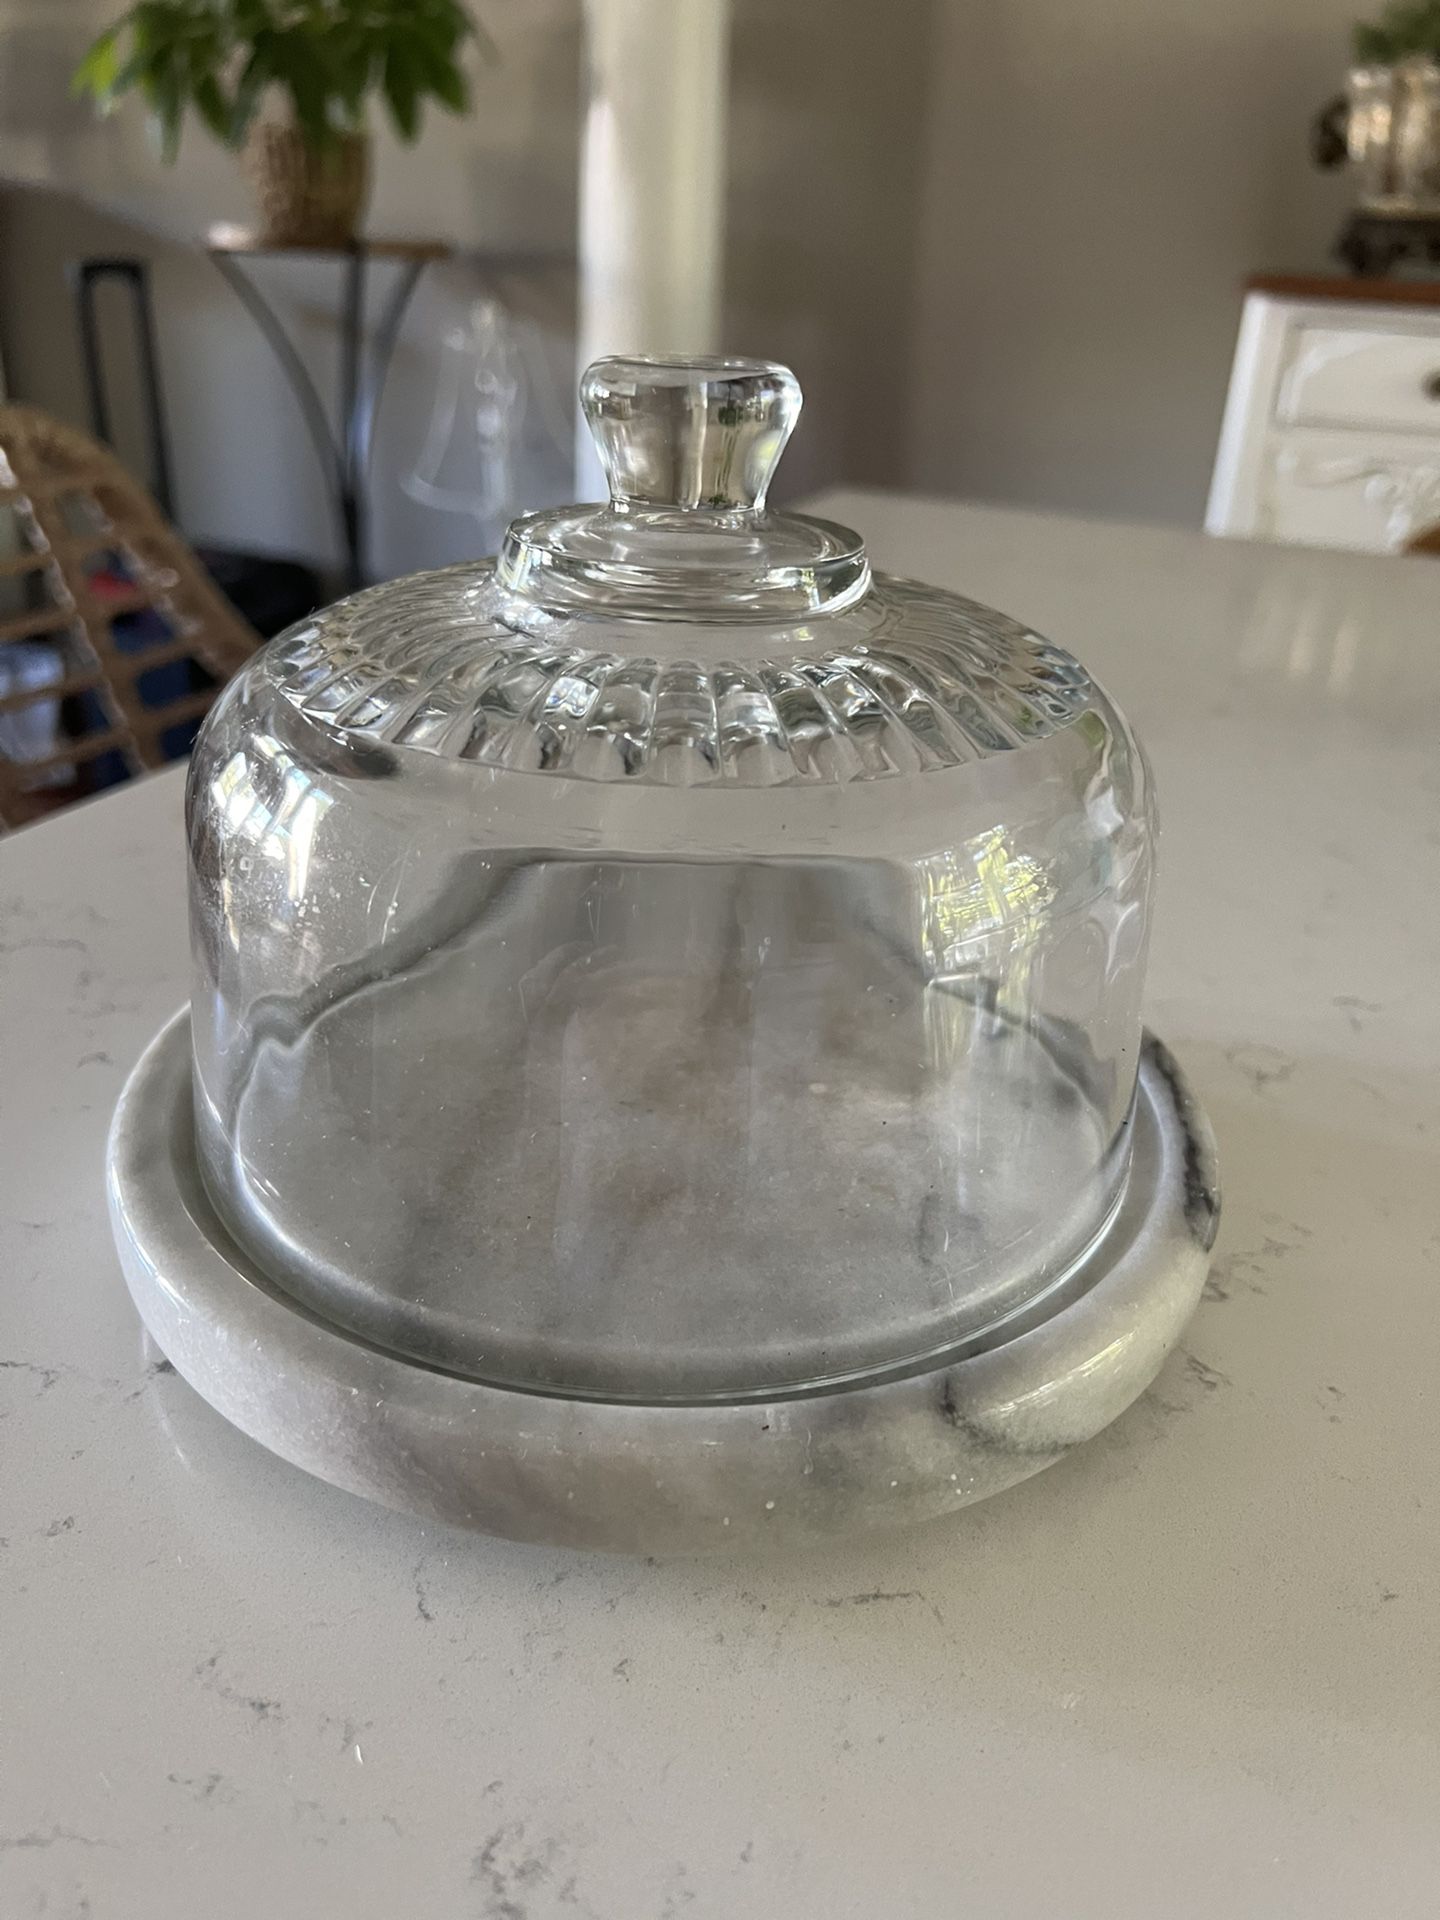 Small cake stand  7.5”